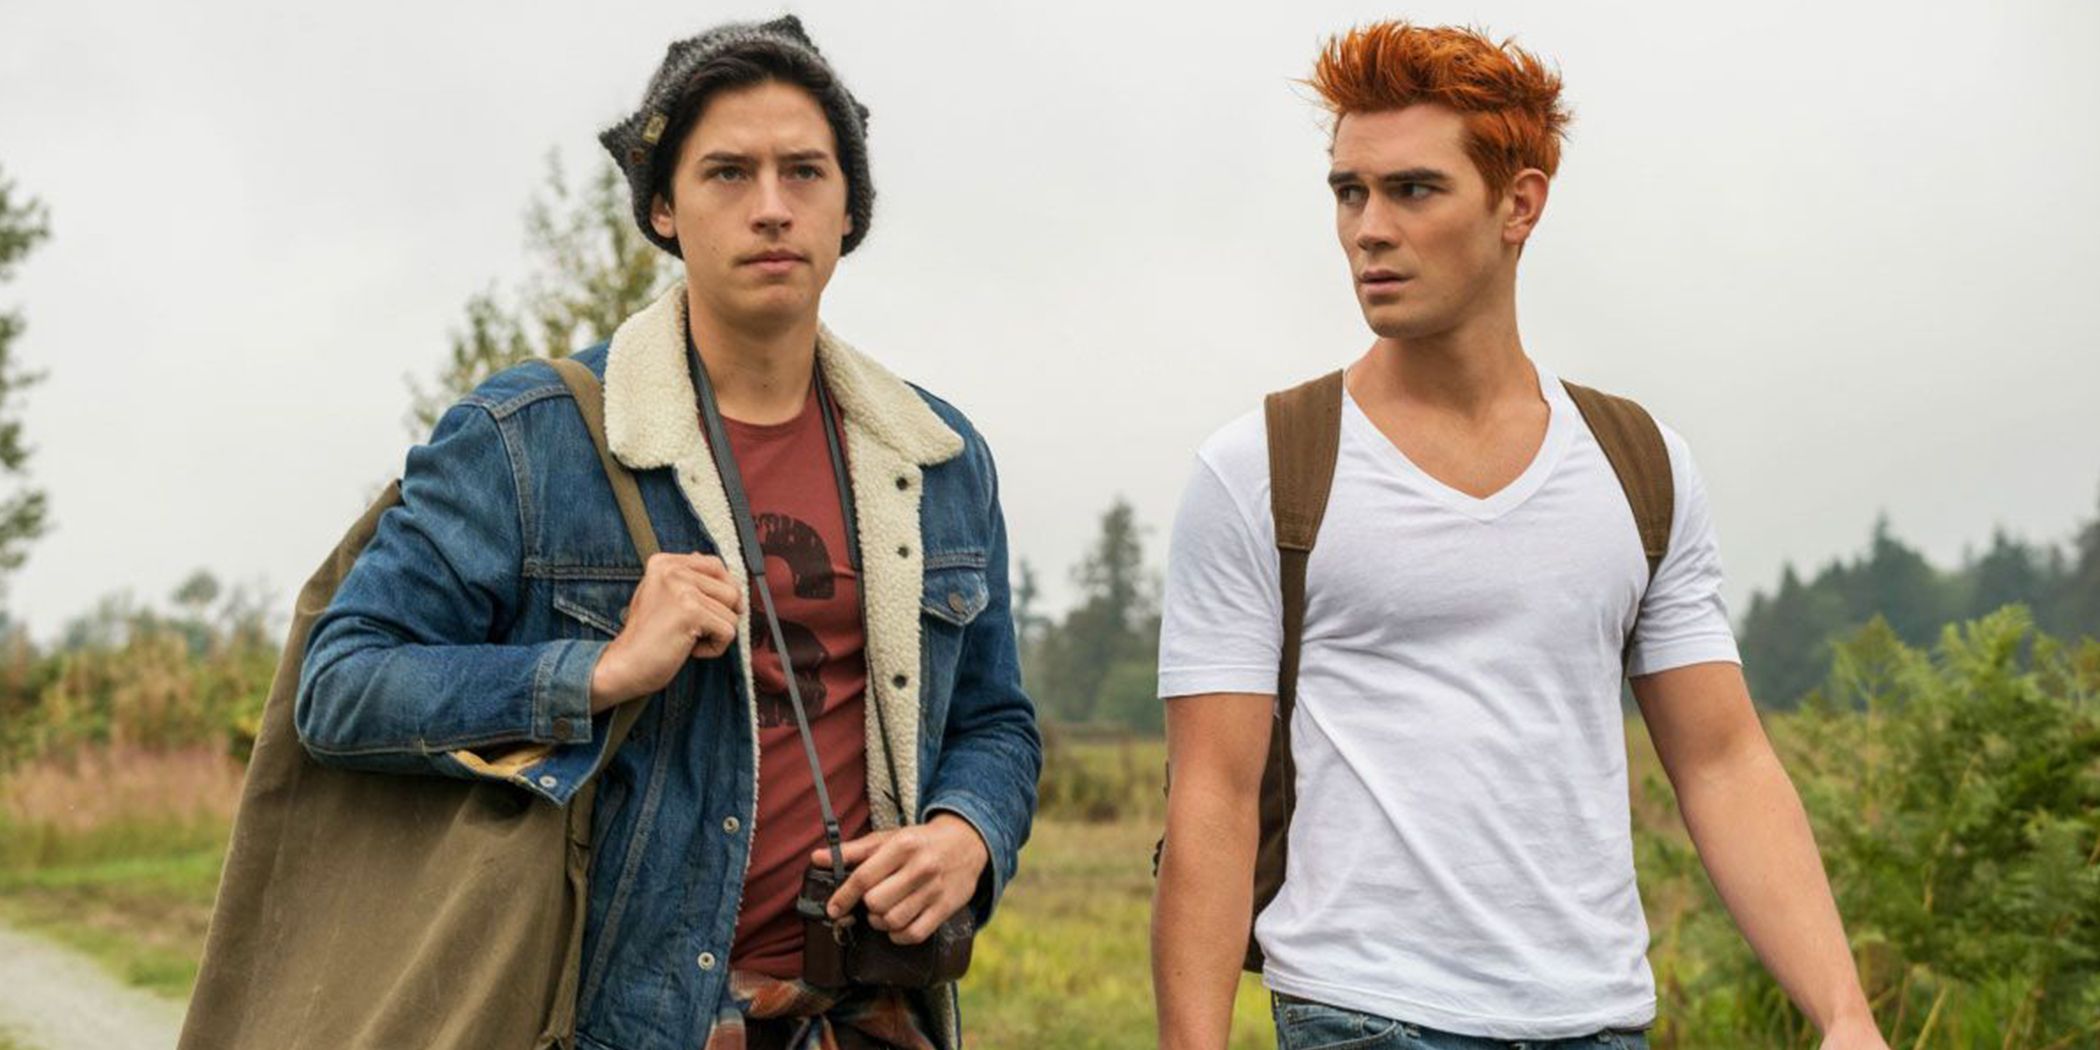 Archie and Jughead walk along a road side by side on Riverdale